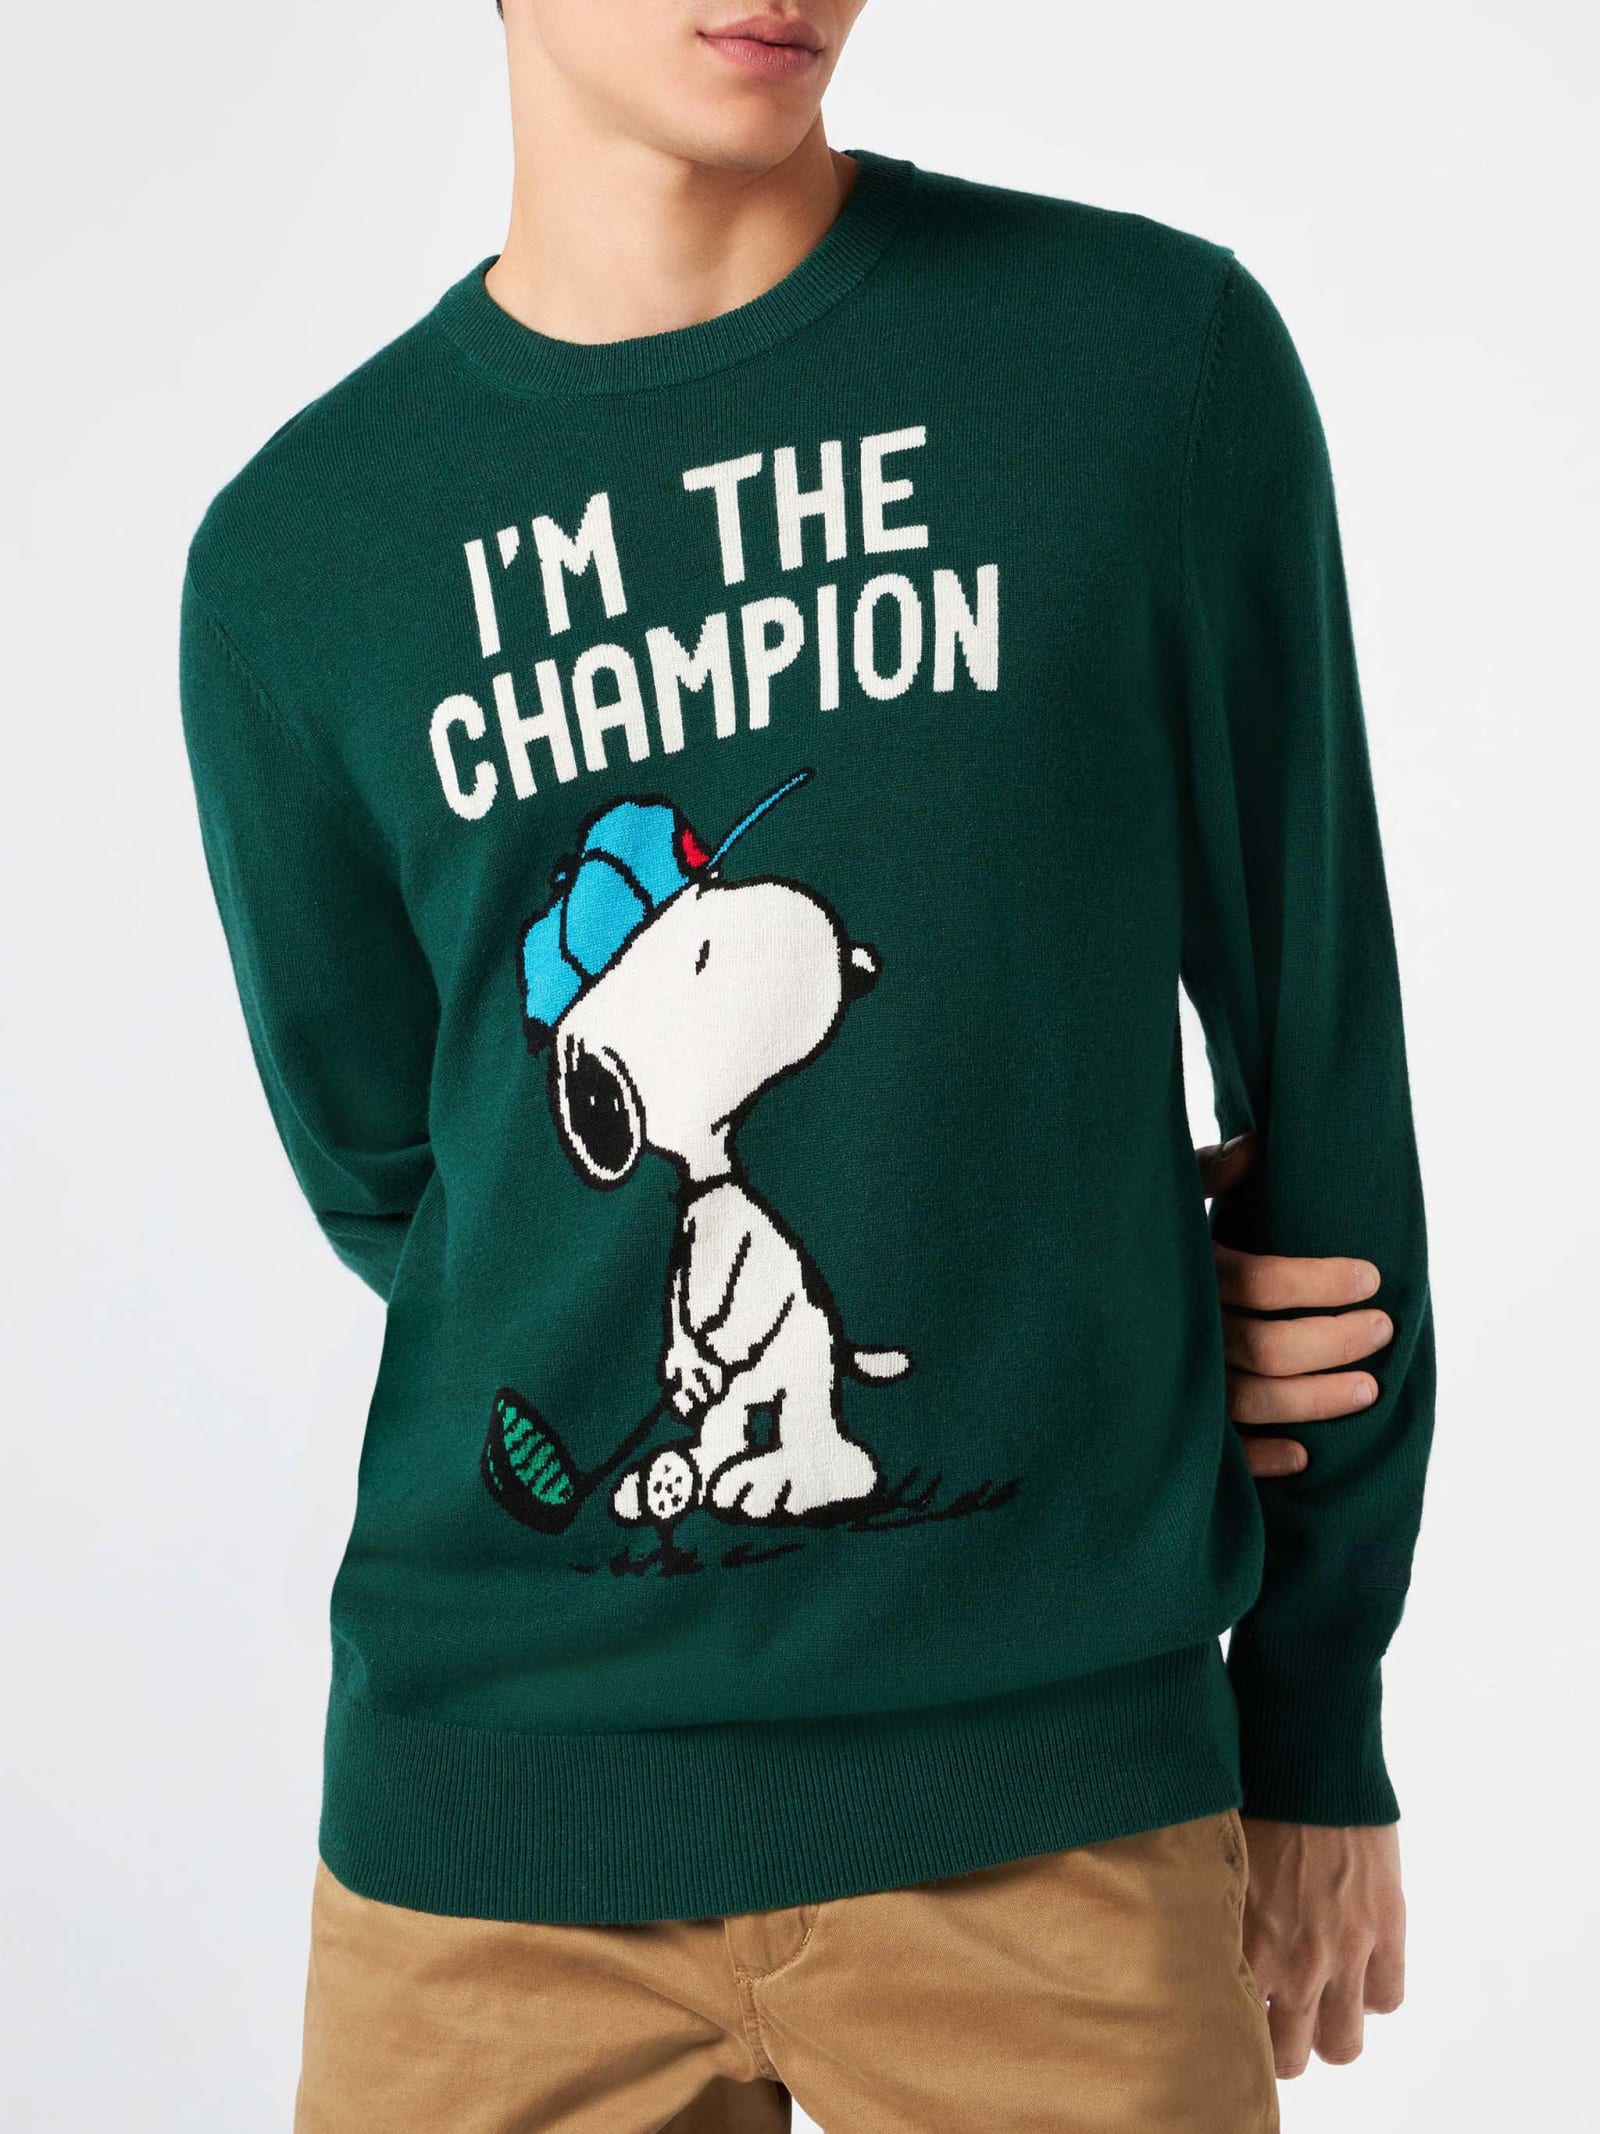 Man Lightweight Sweater With Snoopy Jacquard Print Snoopy Peanuts Special Edition